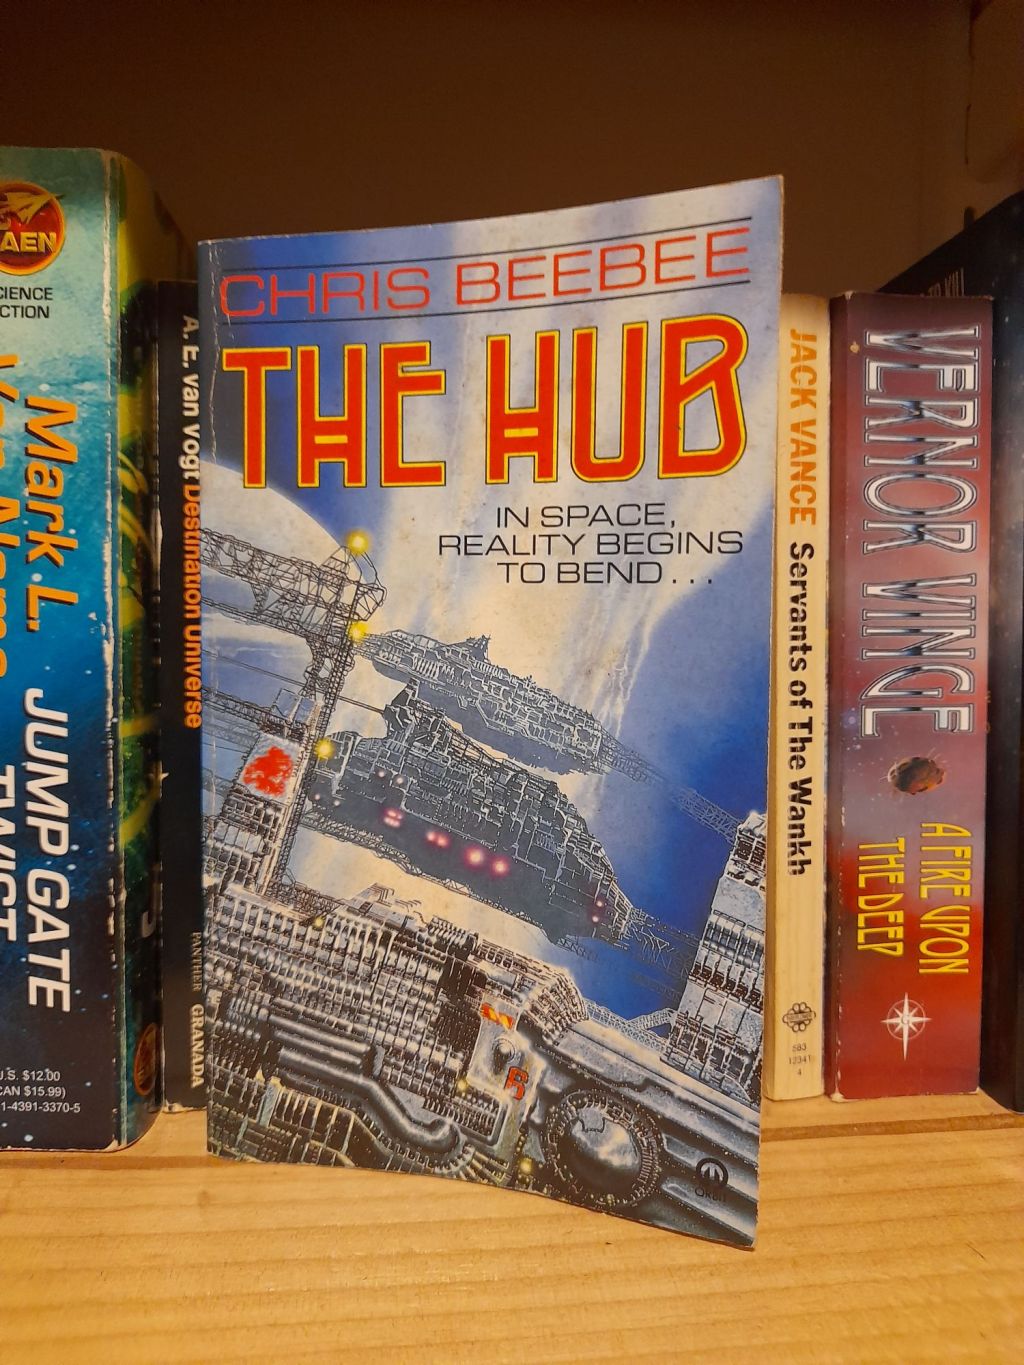 BOOK REVIEW: The Hub, by Chris Beebee